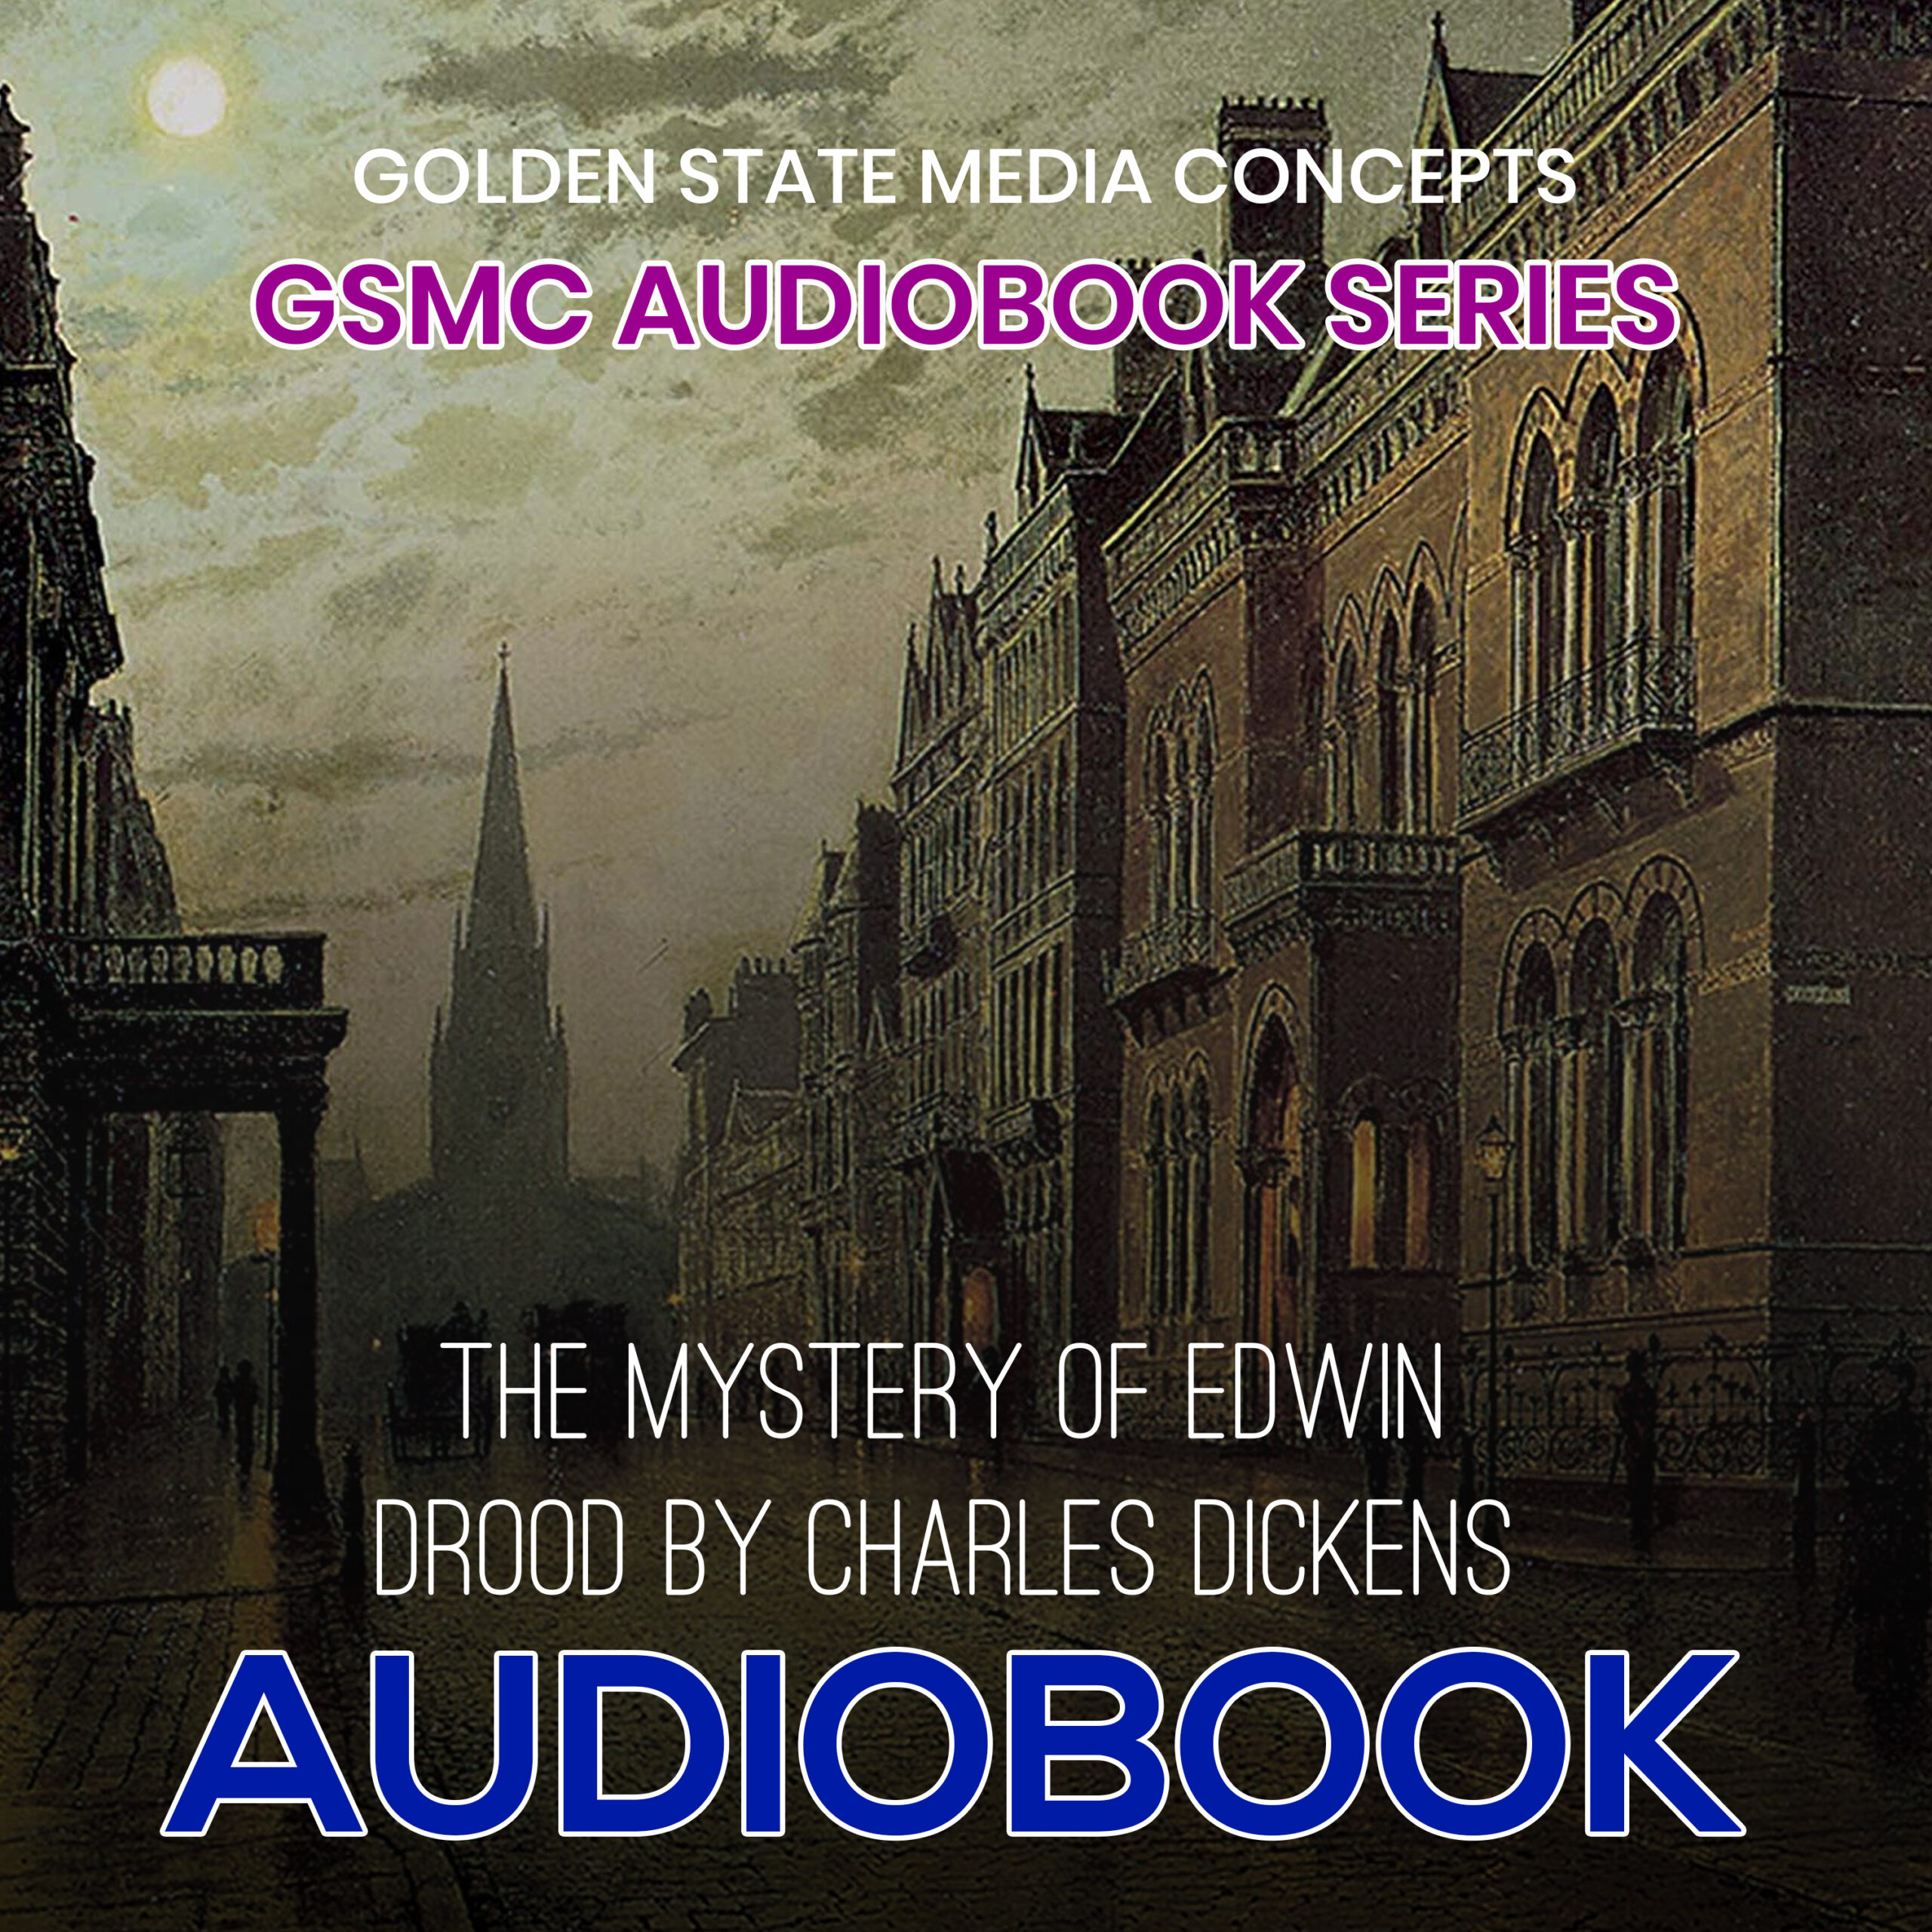 GSMC Audiobook Series: The Mystery of Edwin Drood by Charles Dickens